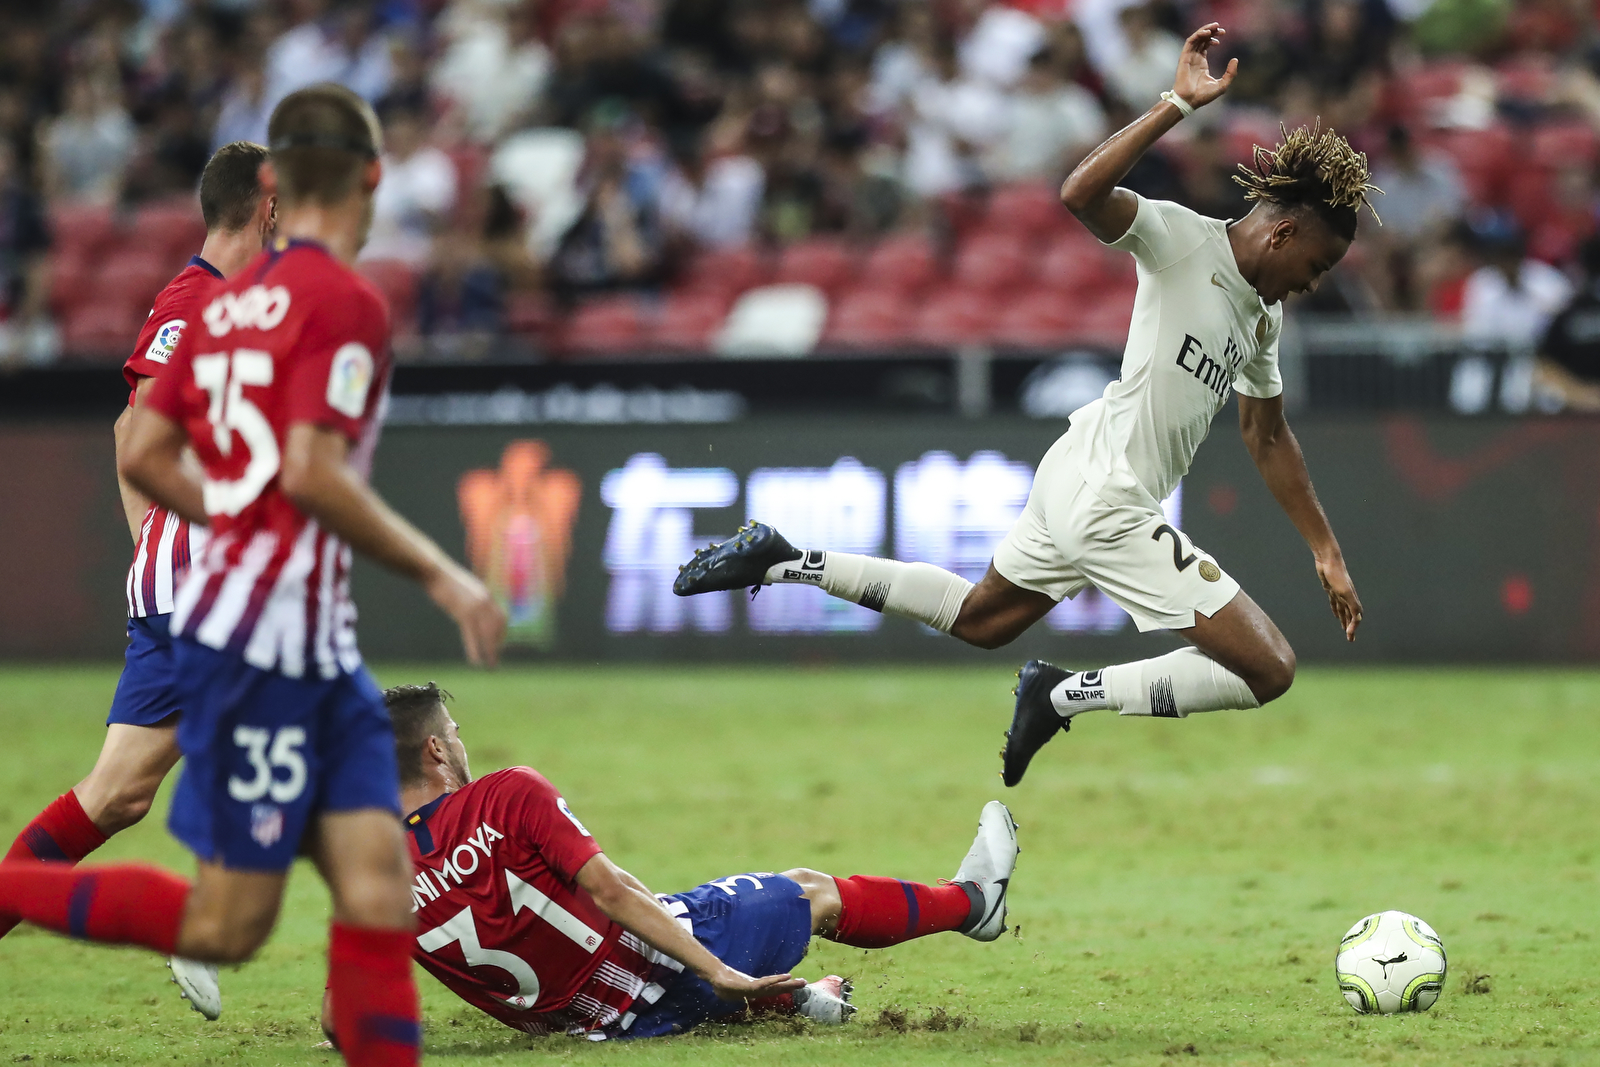  Paris Saint-Germain’s Christopher Nkunku jumps to avoid a tackle by Atletico Madrid’s Toni Moya during the International Champions Cup match between Paris Saint-Germain and Atletico Madrid in Singapore, Monday, July 30, 2018. (AP Photo/Yong Teck Lim